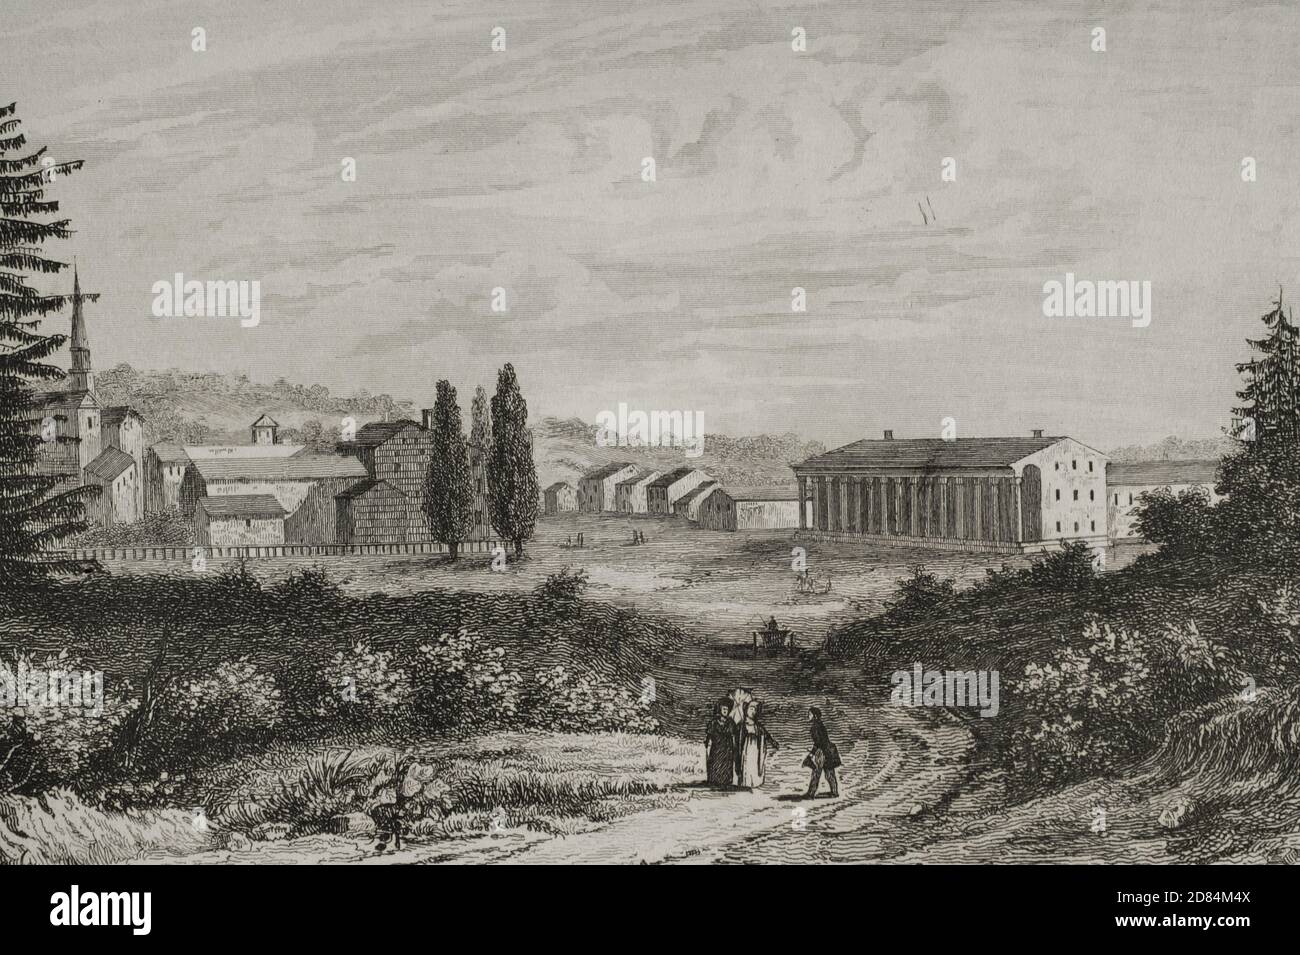 United States. View of Saratoga city. Engraving by Milbert. Panorama Universal. History of the United States of America, from 1st edition of Jean B.G. Roux de Rochelle's Etats-Unis d'Amérique in 1837. Spanish edition, printed in Barcelona, 1850. Stock Photo